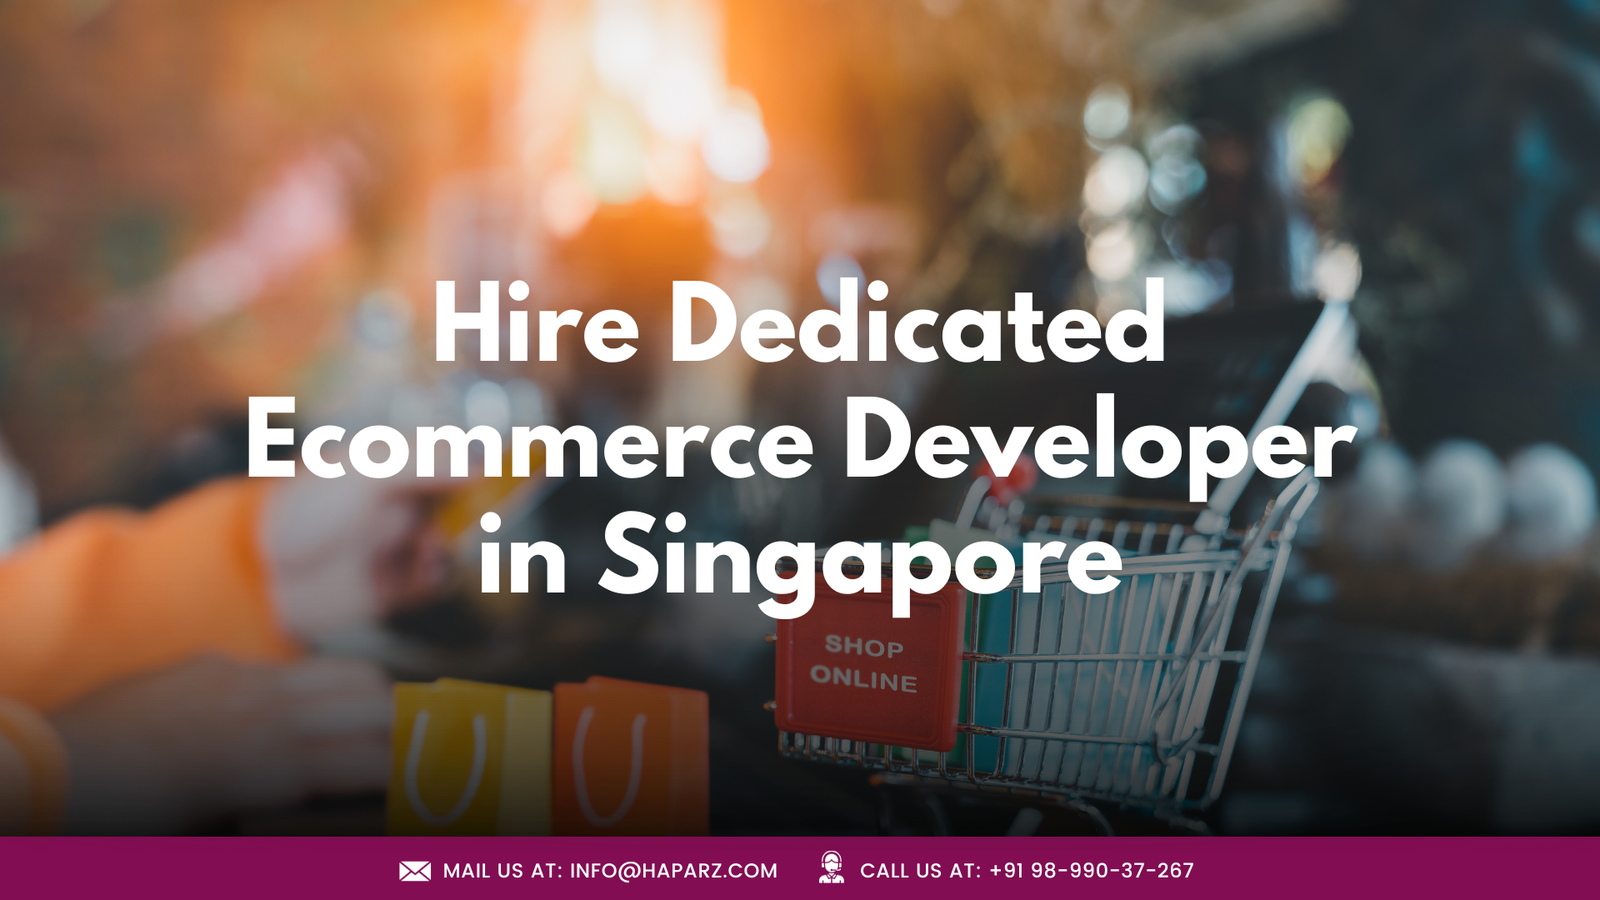 Hire Dedicated Ecommerce Developer in Singapore